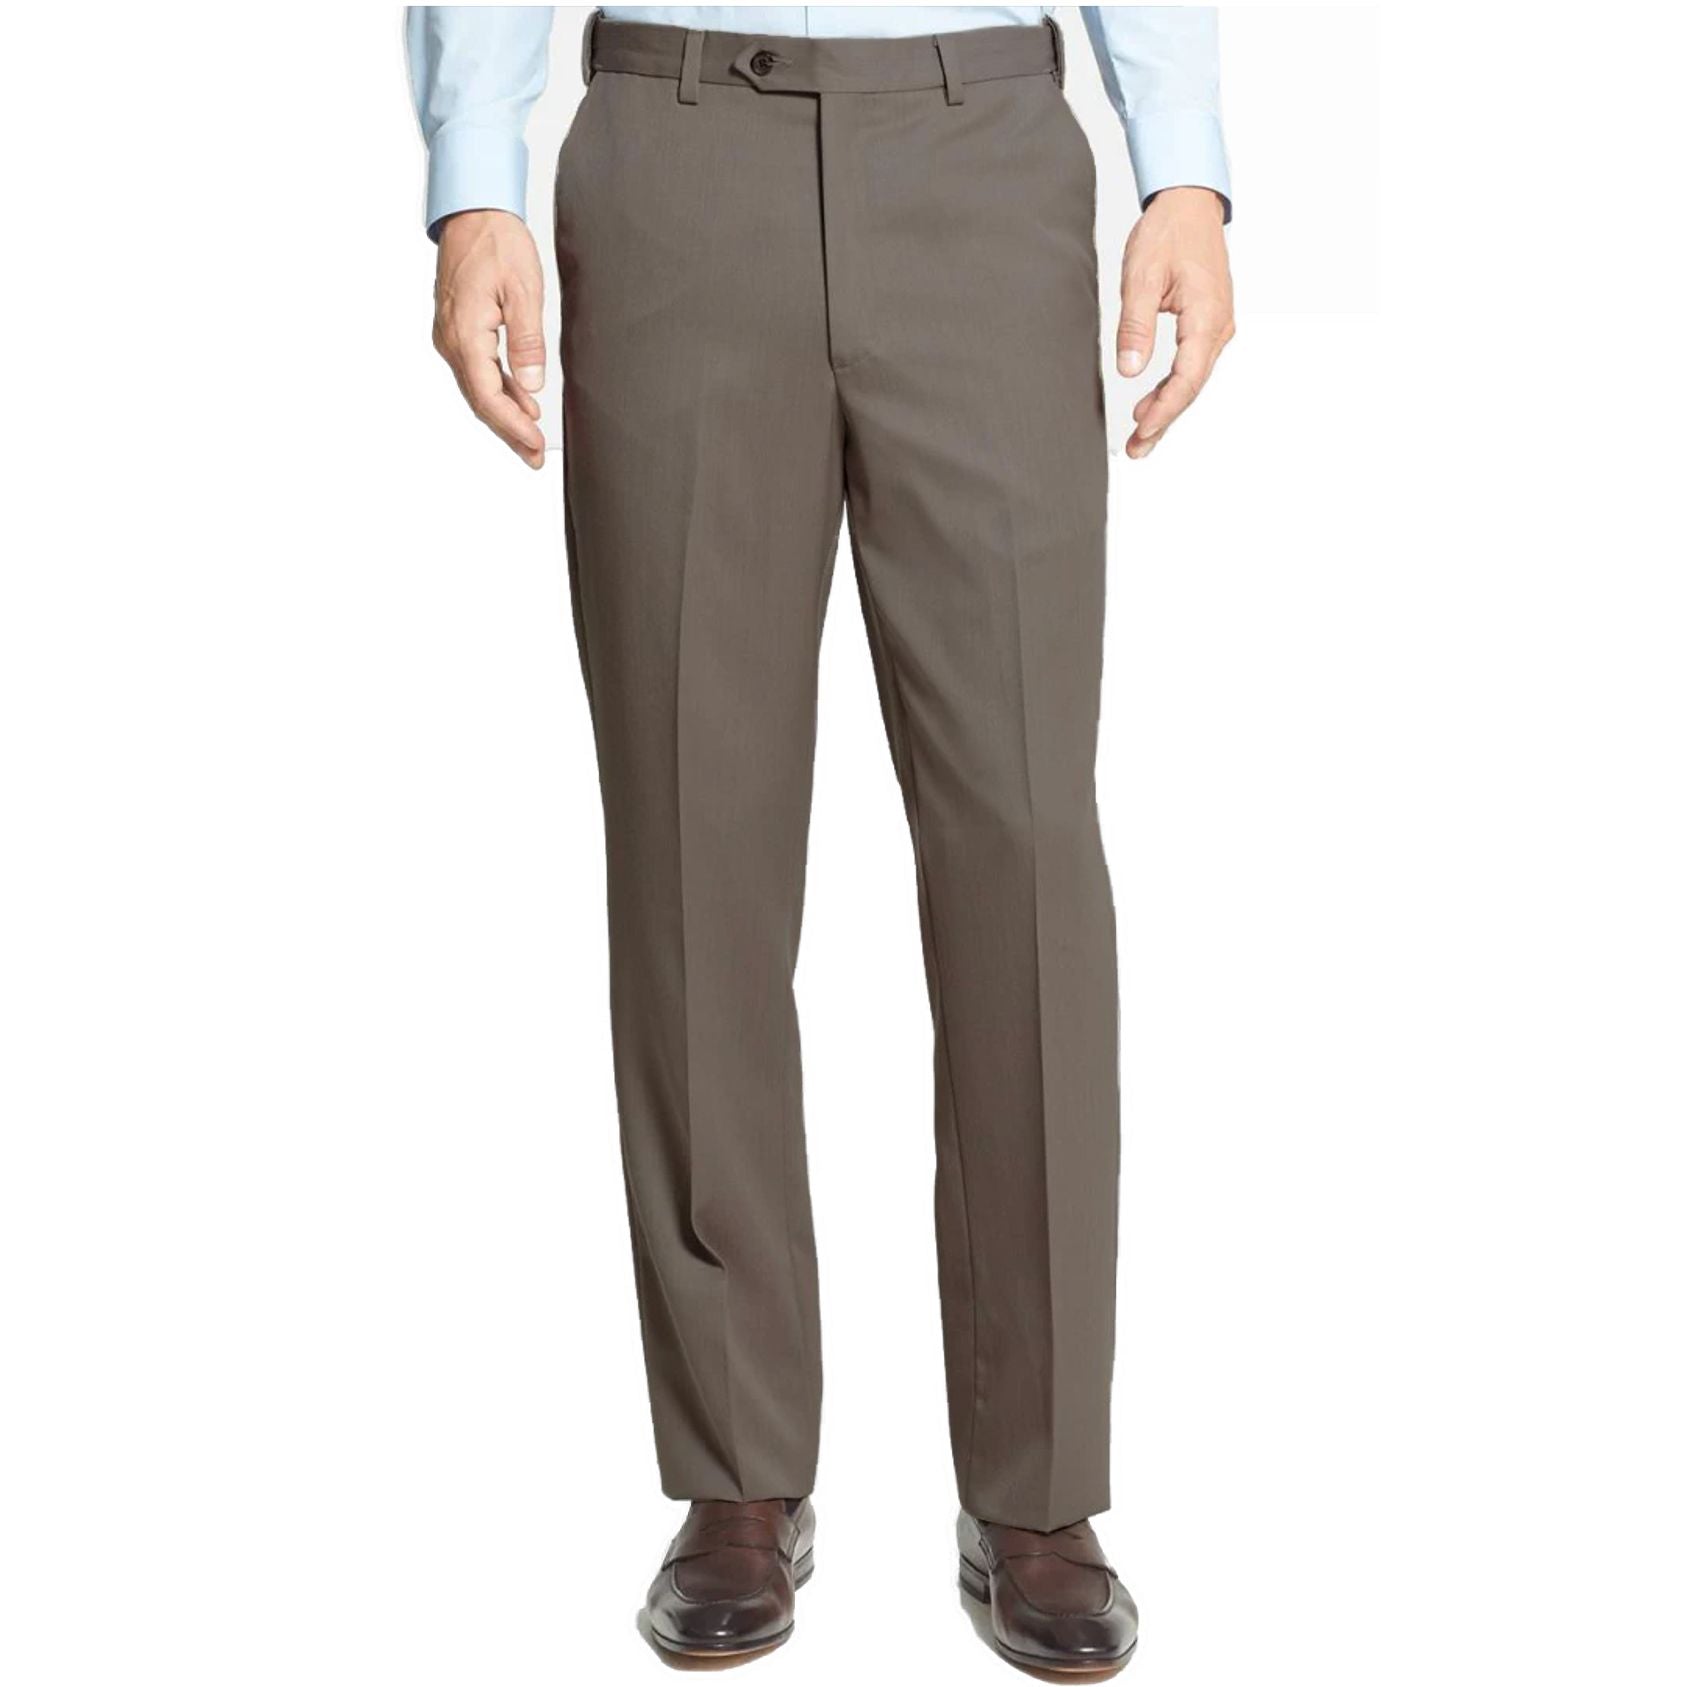 Worsted Wool Gabardine Trouser in Tan (Self Sizer Plain Front) by Berle